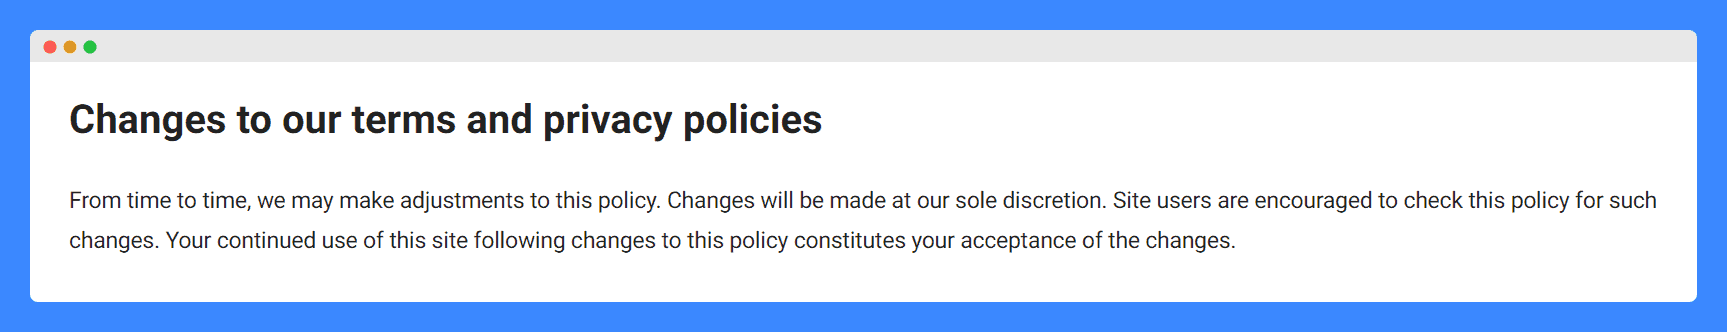 Sample "changes to the policy" clause in terms and conditions